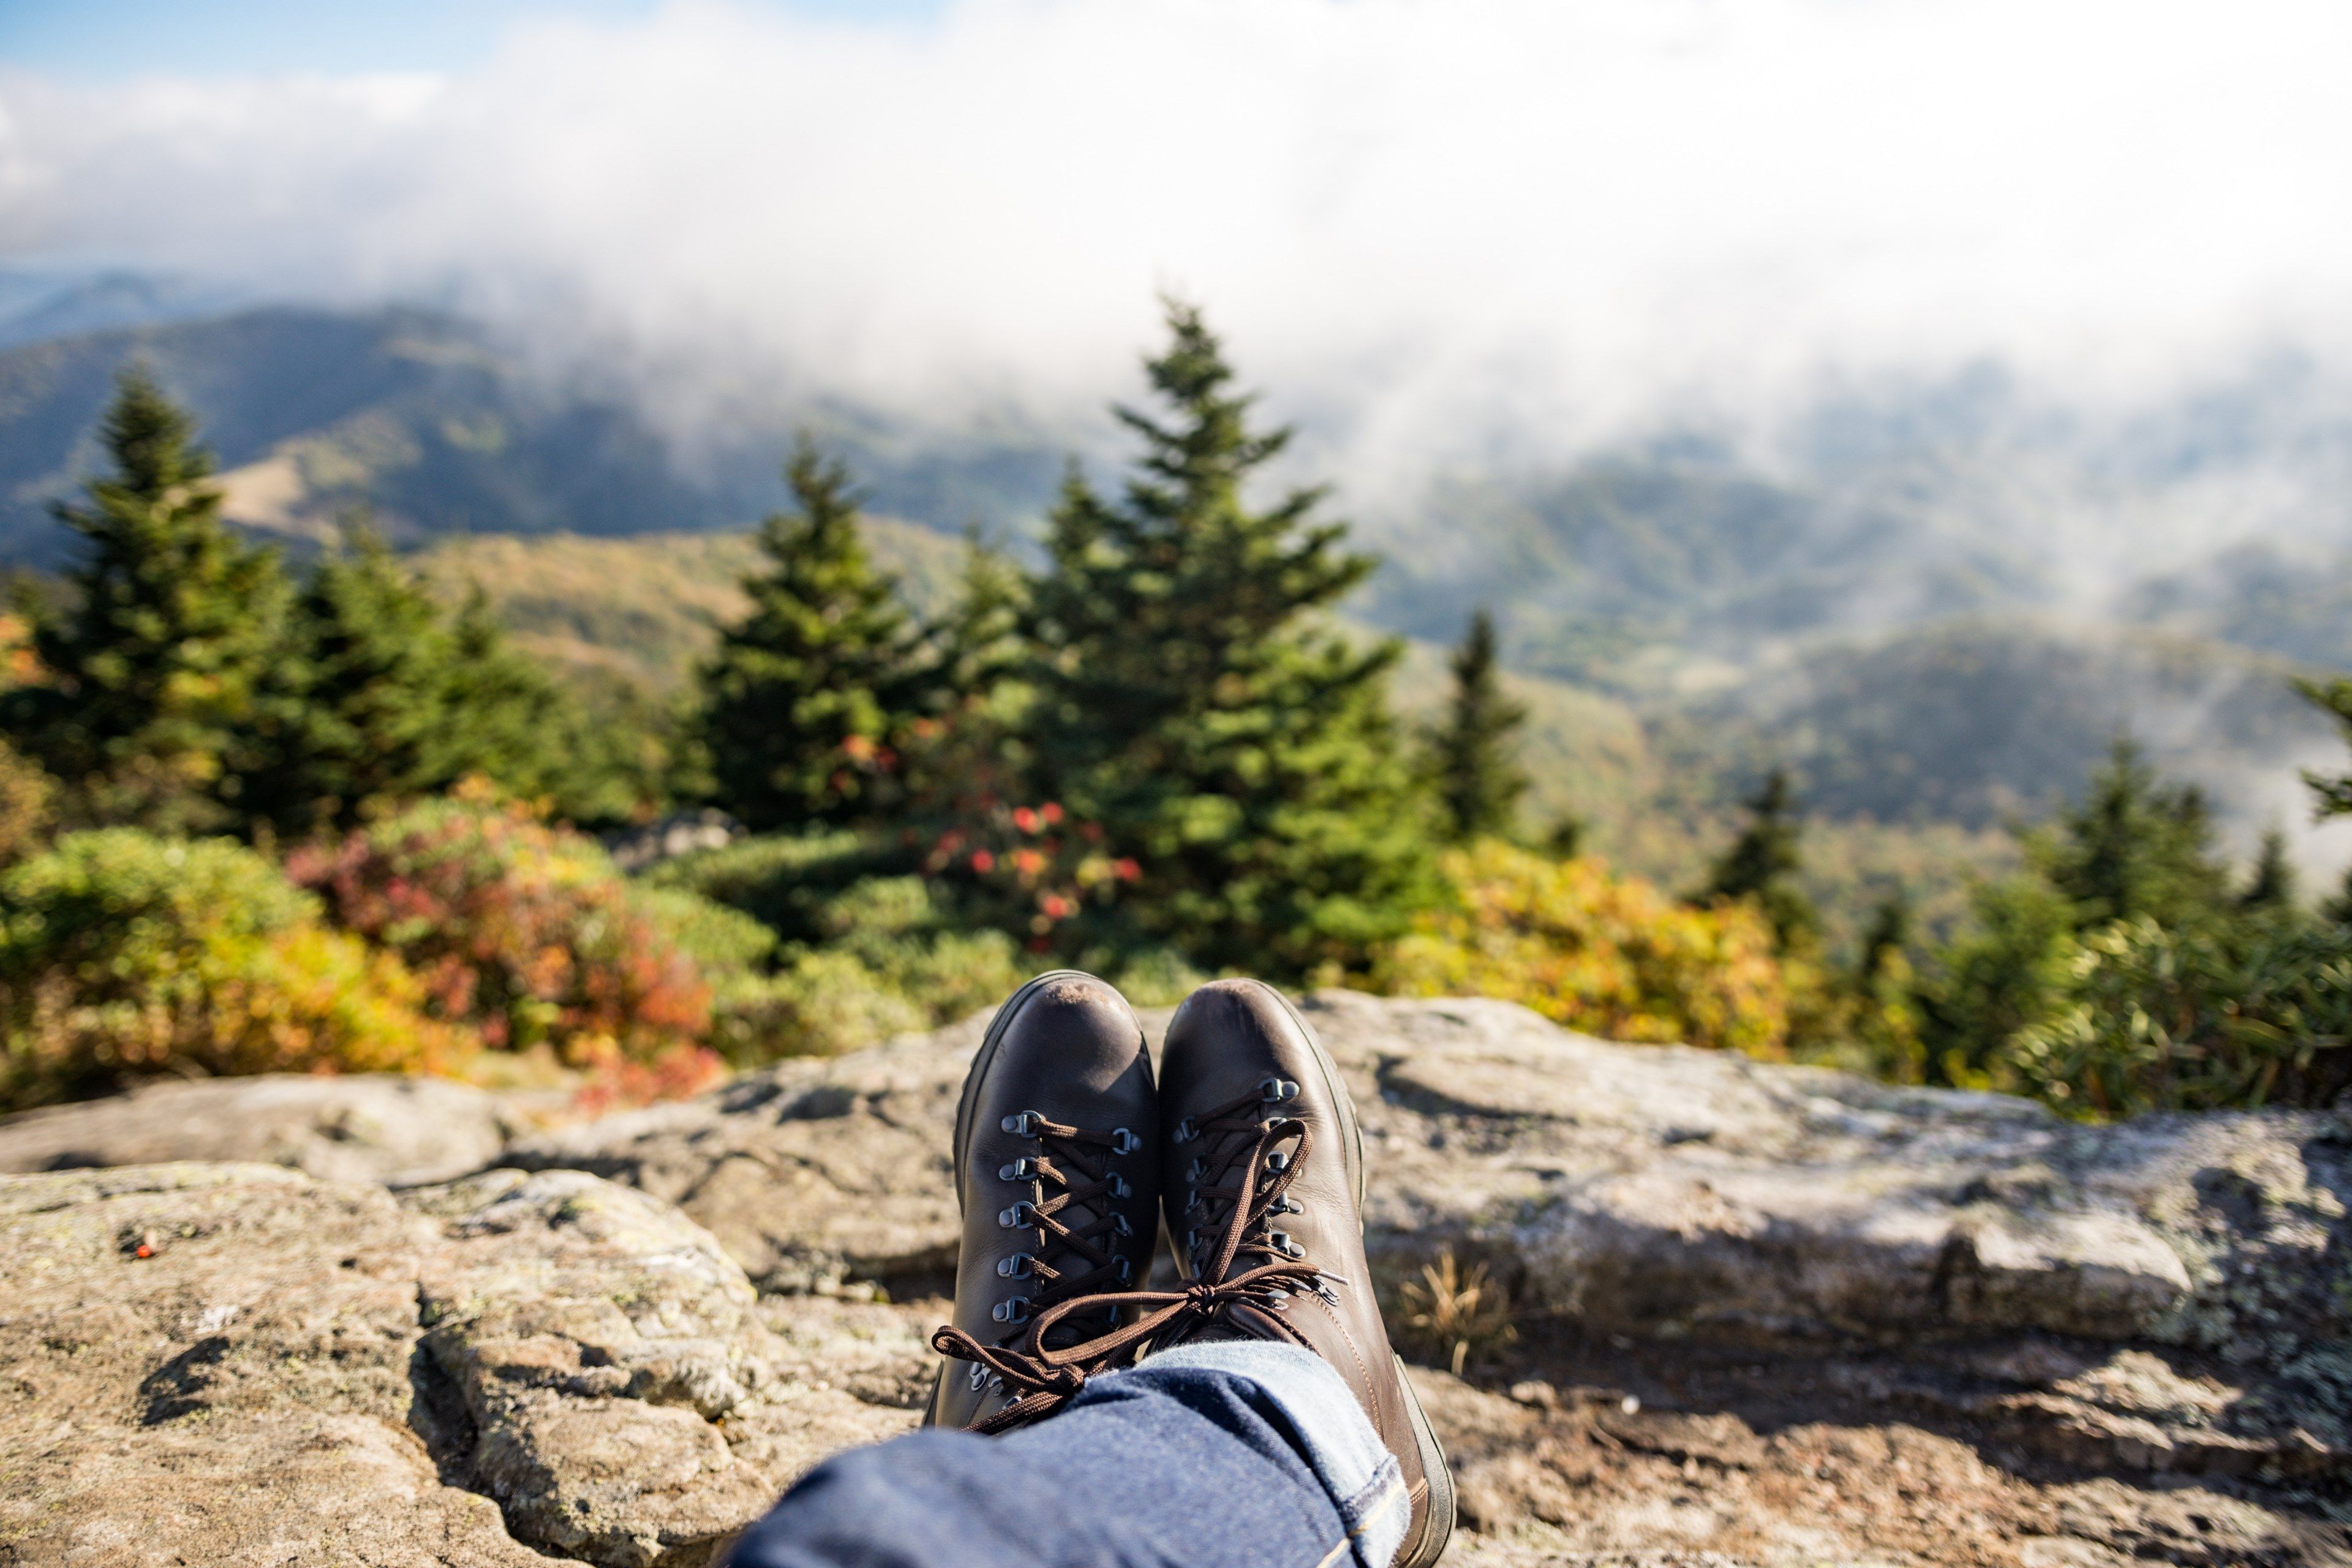 Wallpaper / a person wearing hiking boots and jeans resting on a rock looking out into the fog covered mountains, resting over a valley 4k wallpaper